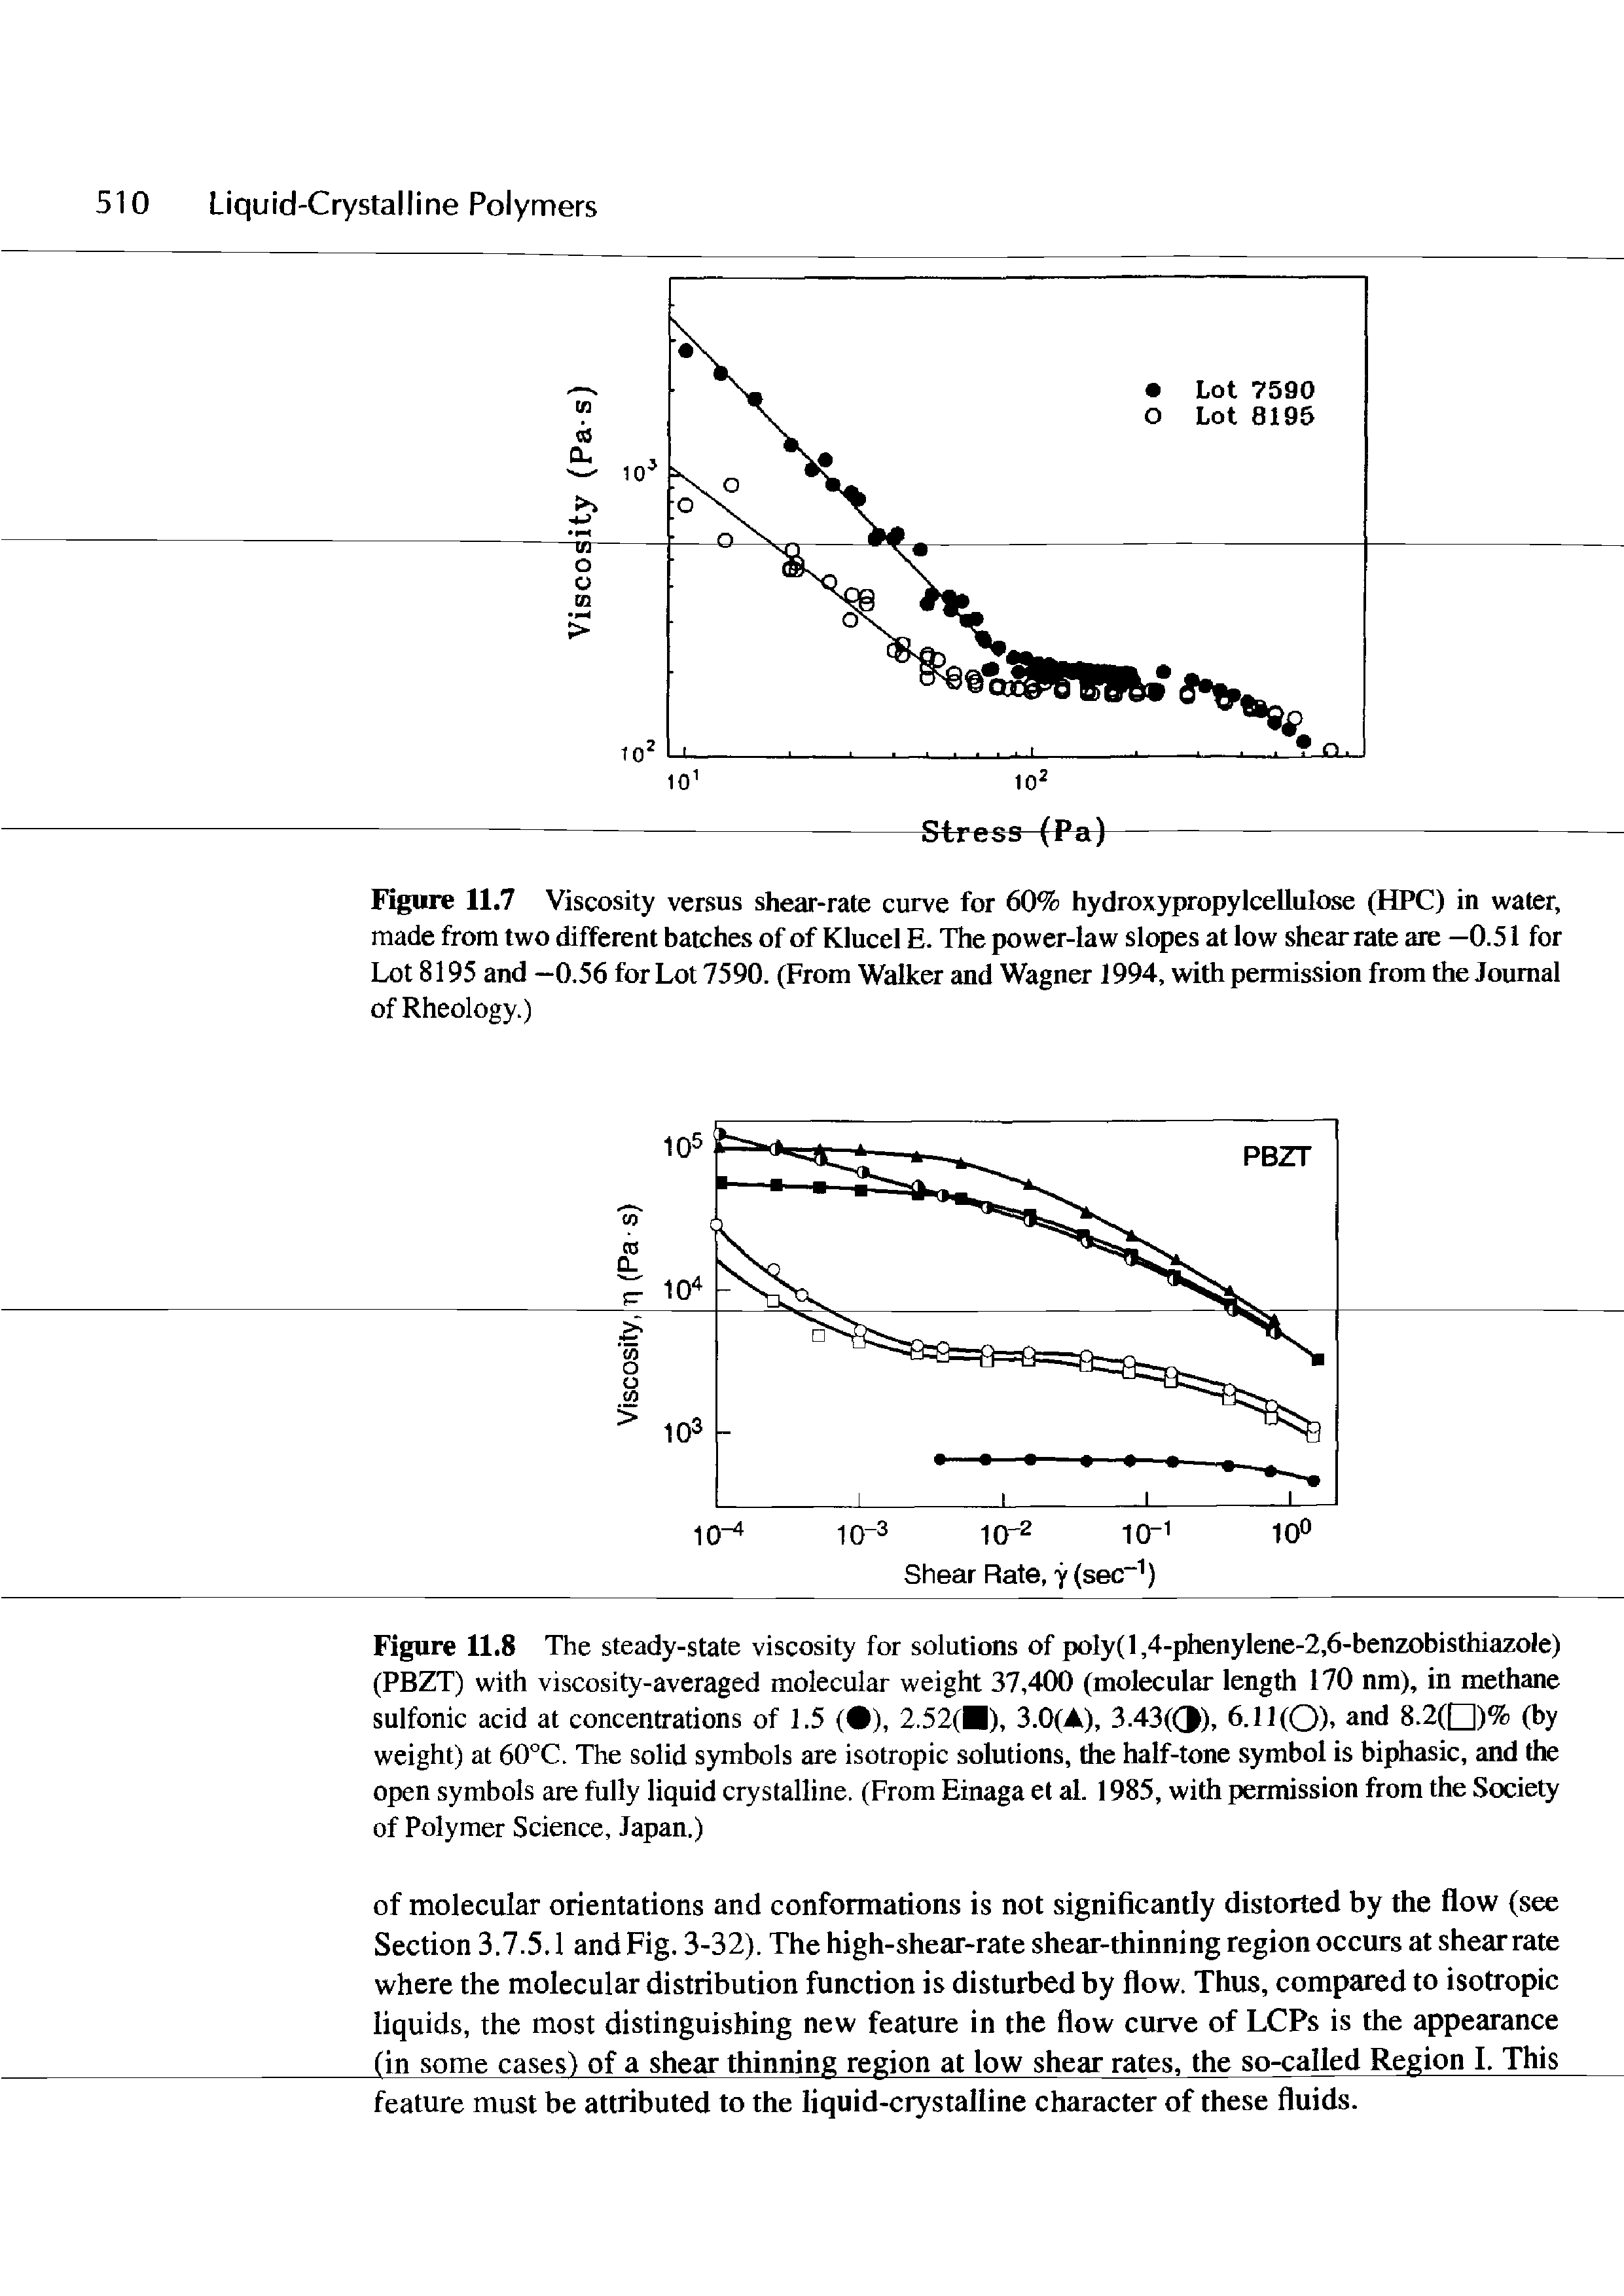 Figure 11.7 Viscosity versus shear-rate curve for 60% hydroxypropylcellulose (HPC) in water, made from two different batches of of Klucel E. The power-law slopes at low shear rate are —0.51 for Lot 8195 and —0.56 for Lot 7590. (From Walker and Wagner 1994, with permission from the Journal...